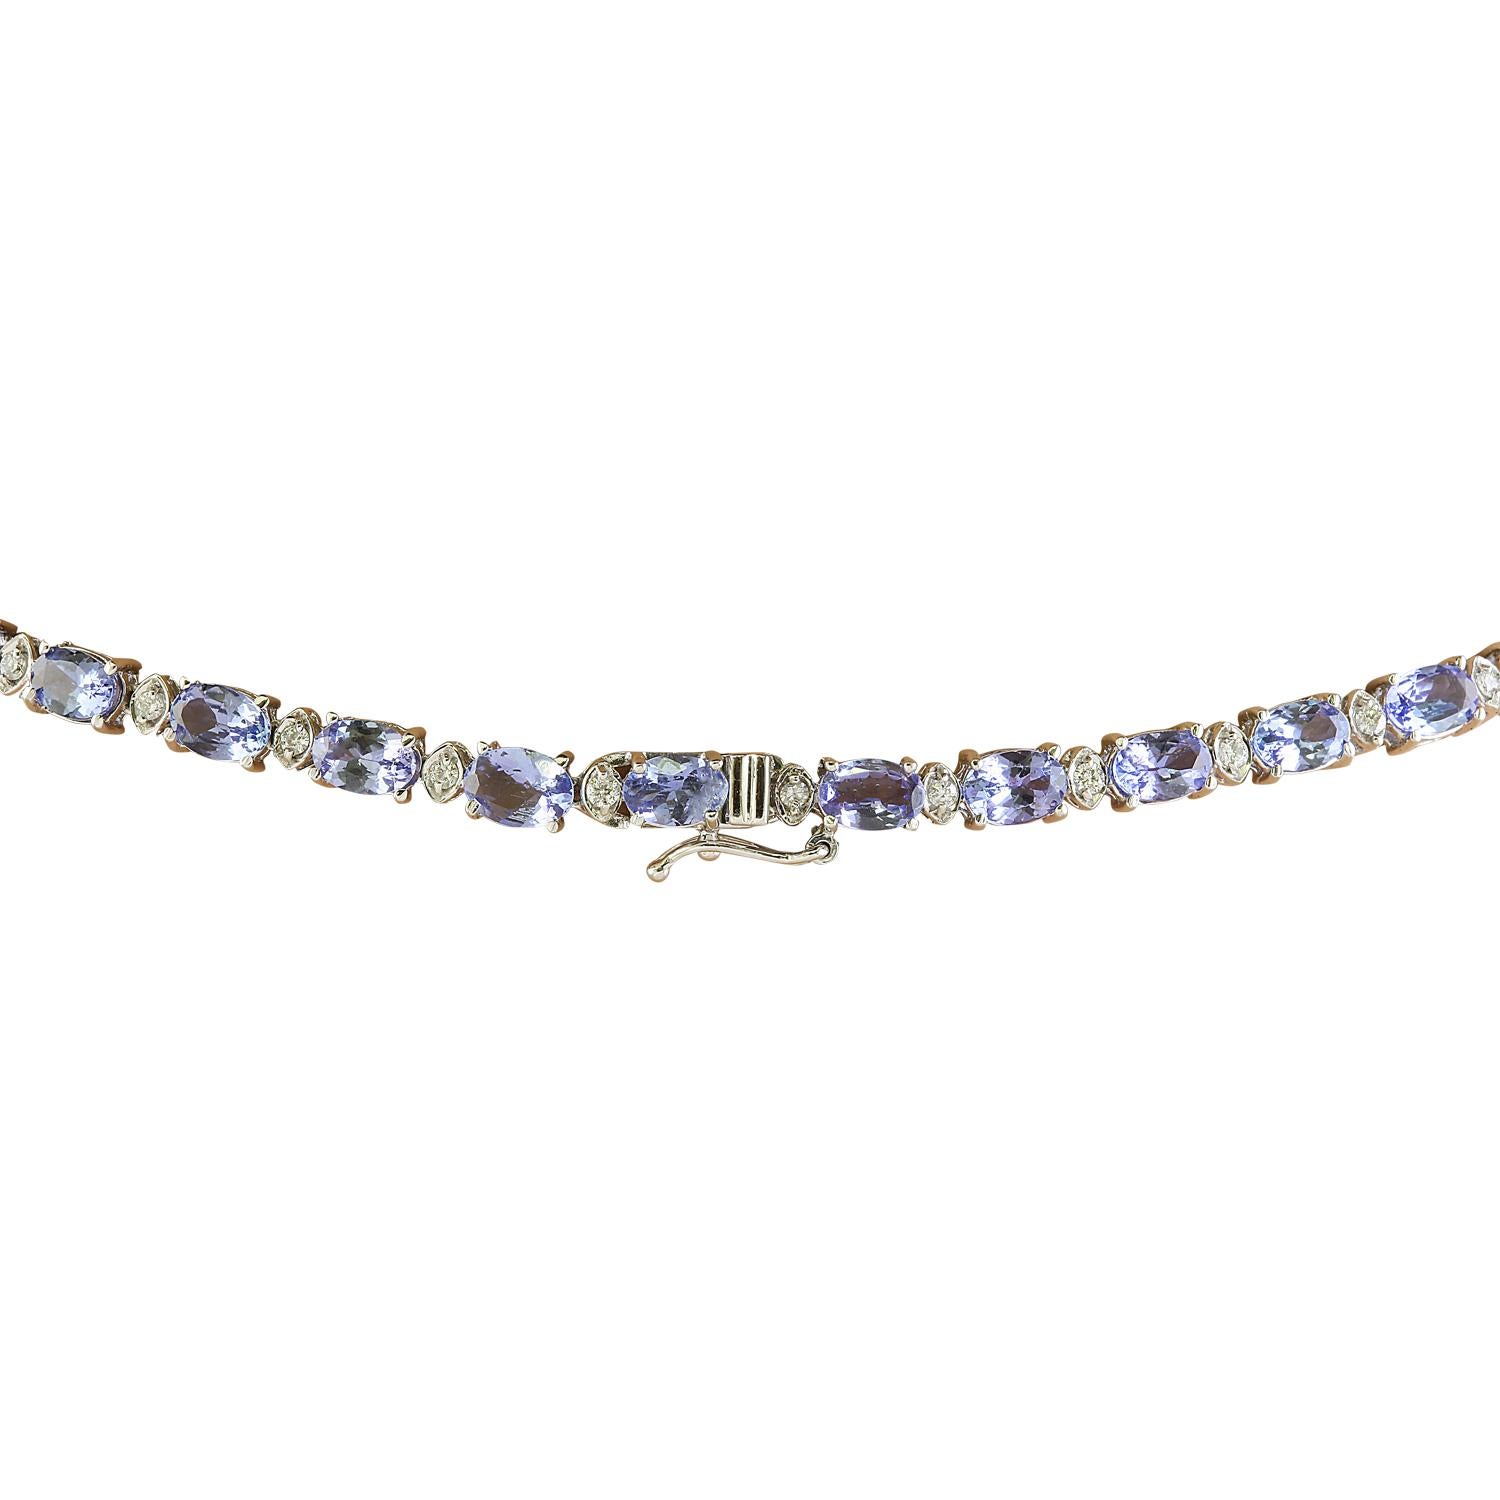 38.20 Carat Natural Tanzanite 14 Karat Solid White Gold Diamond Necklace
Stamped: 14K
Total Necklace Weight: 18 Grams
Necklace Length 18 Inches
Center Tanzanite Weight: 1.60 Carat (8.00x6.00 Millimeters)
 Side Tanzanite Weight: 34.40 Carat